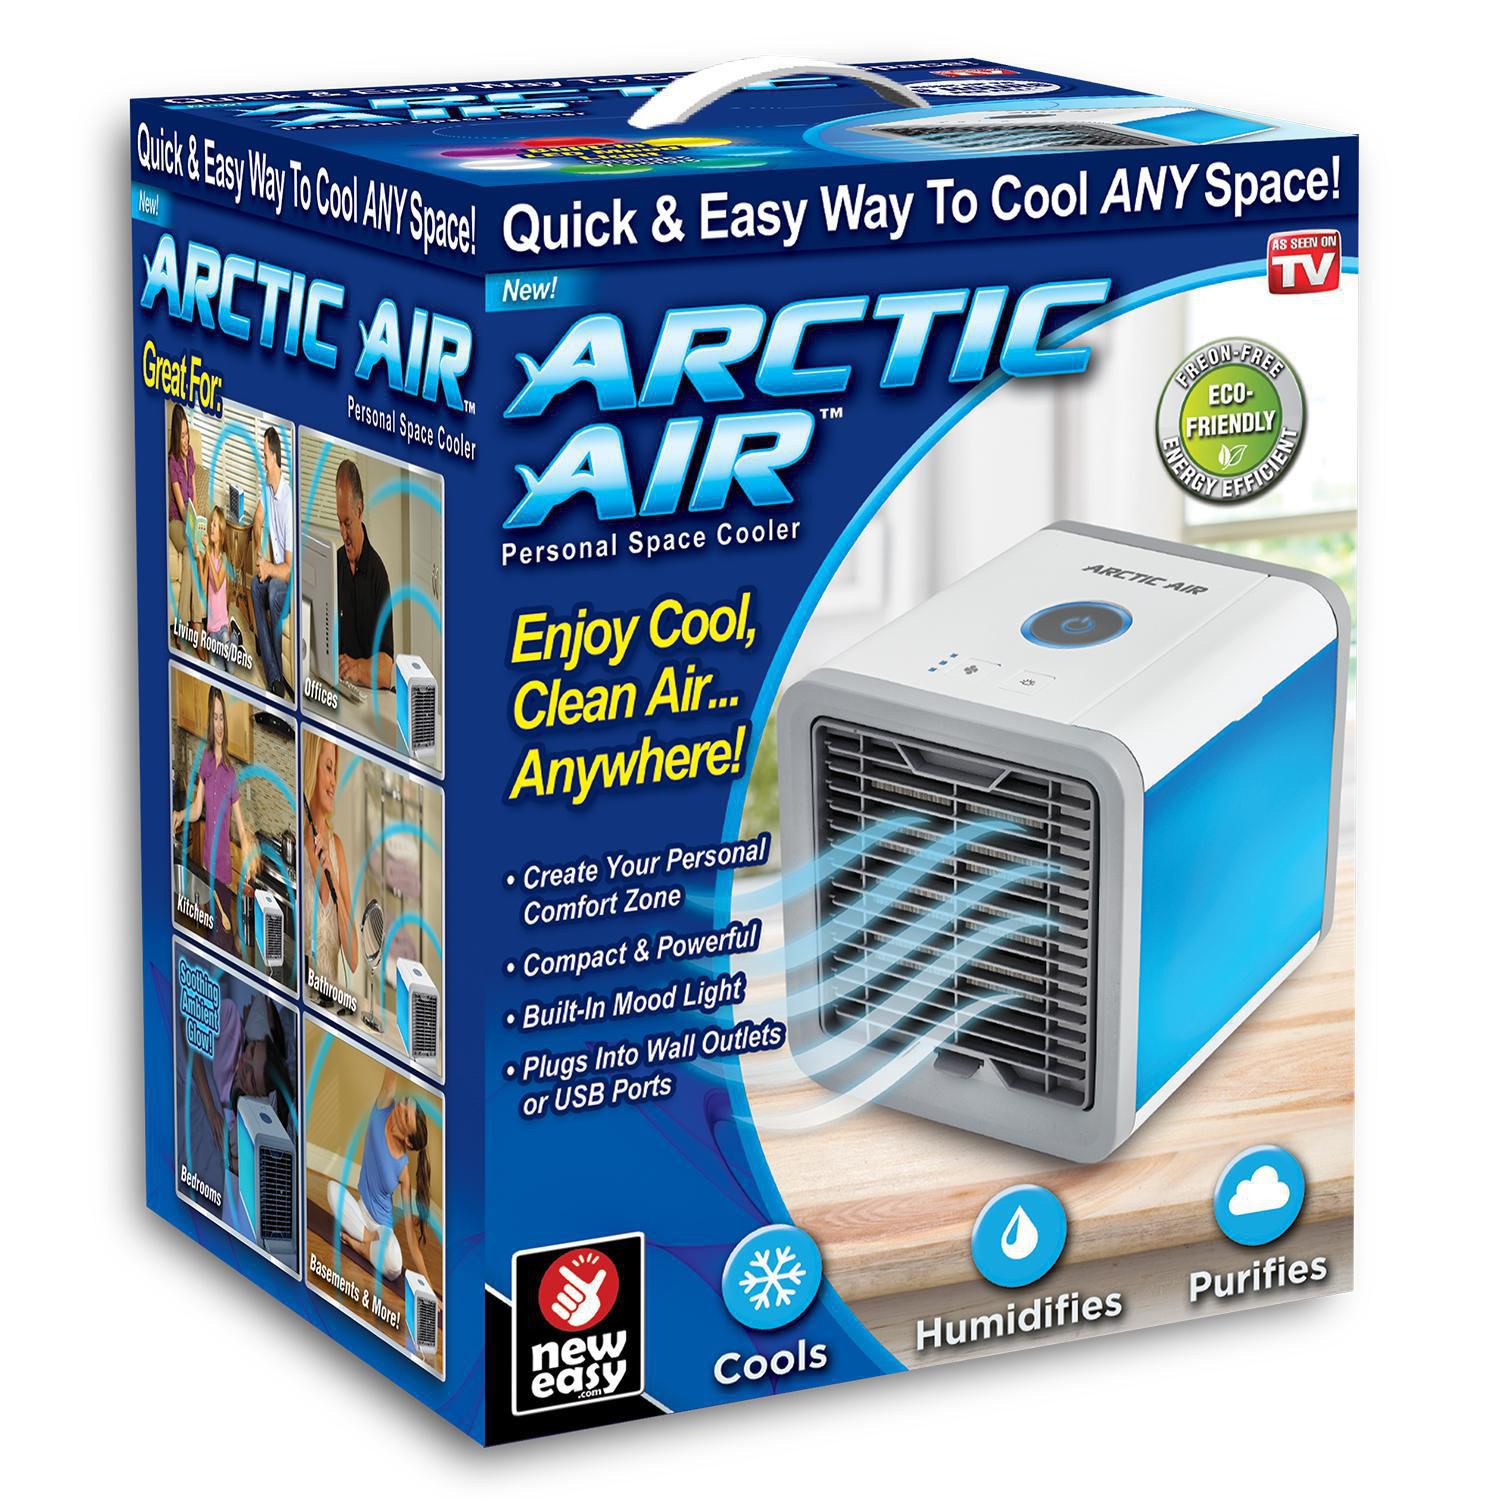 Ontel Arctic Air Pure Chill Evaporative Air Cooler with UV Light